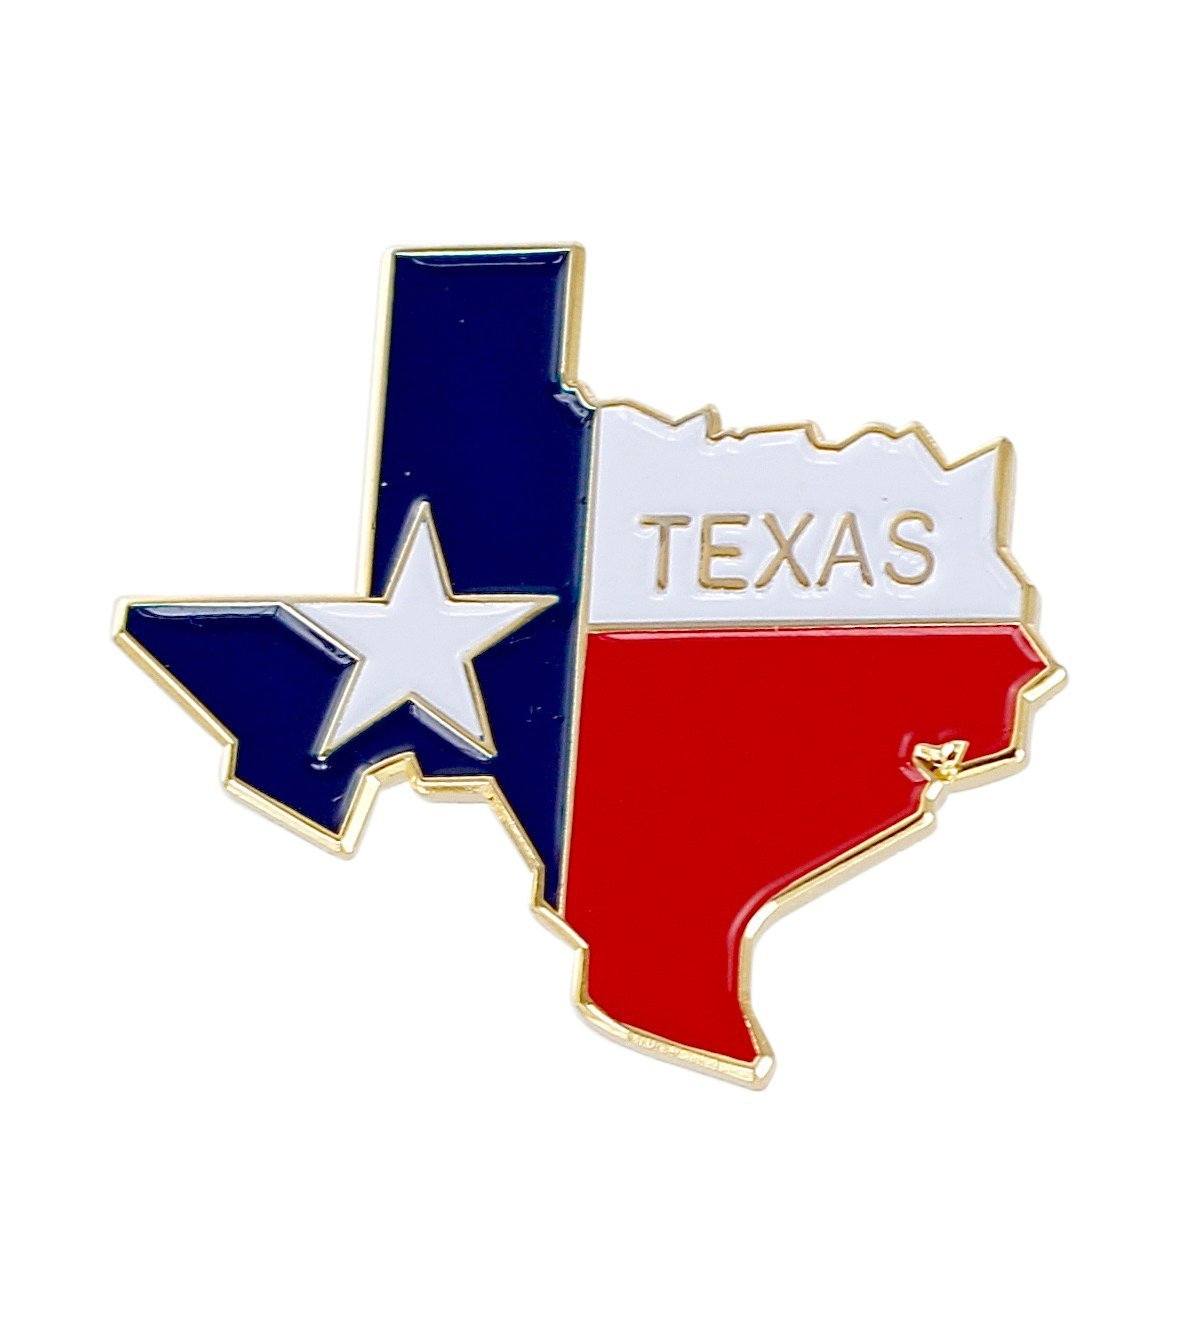 State Shape of Texas and Texas Flag Lapel Pin Pin WizardPins 1 Pin 